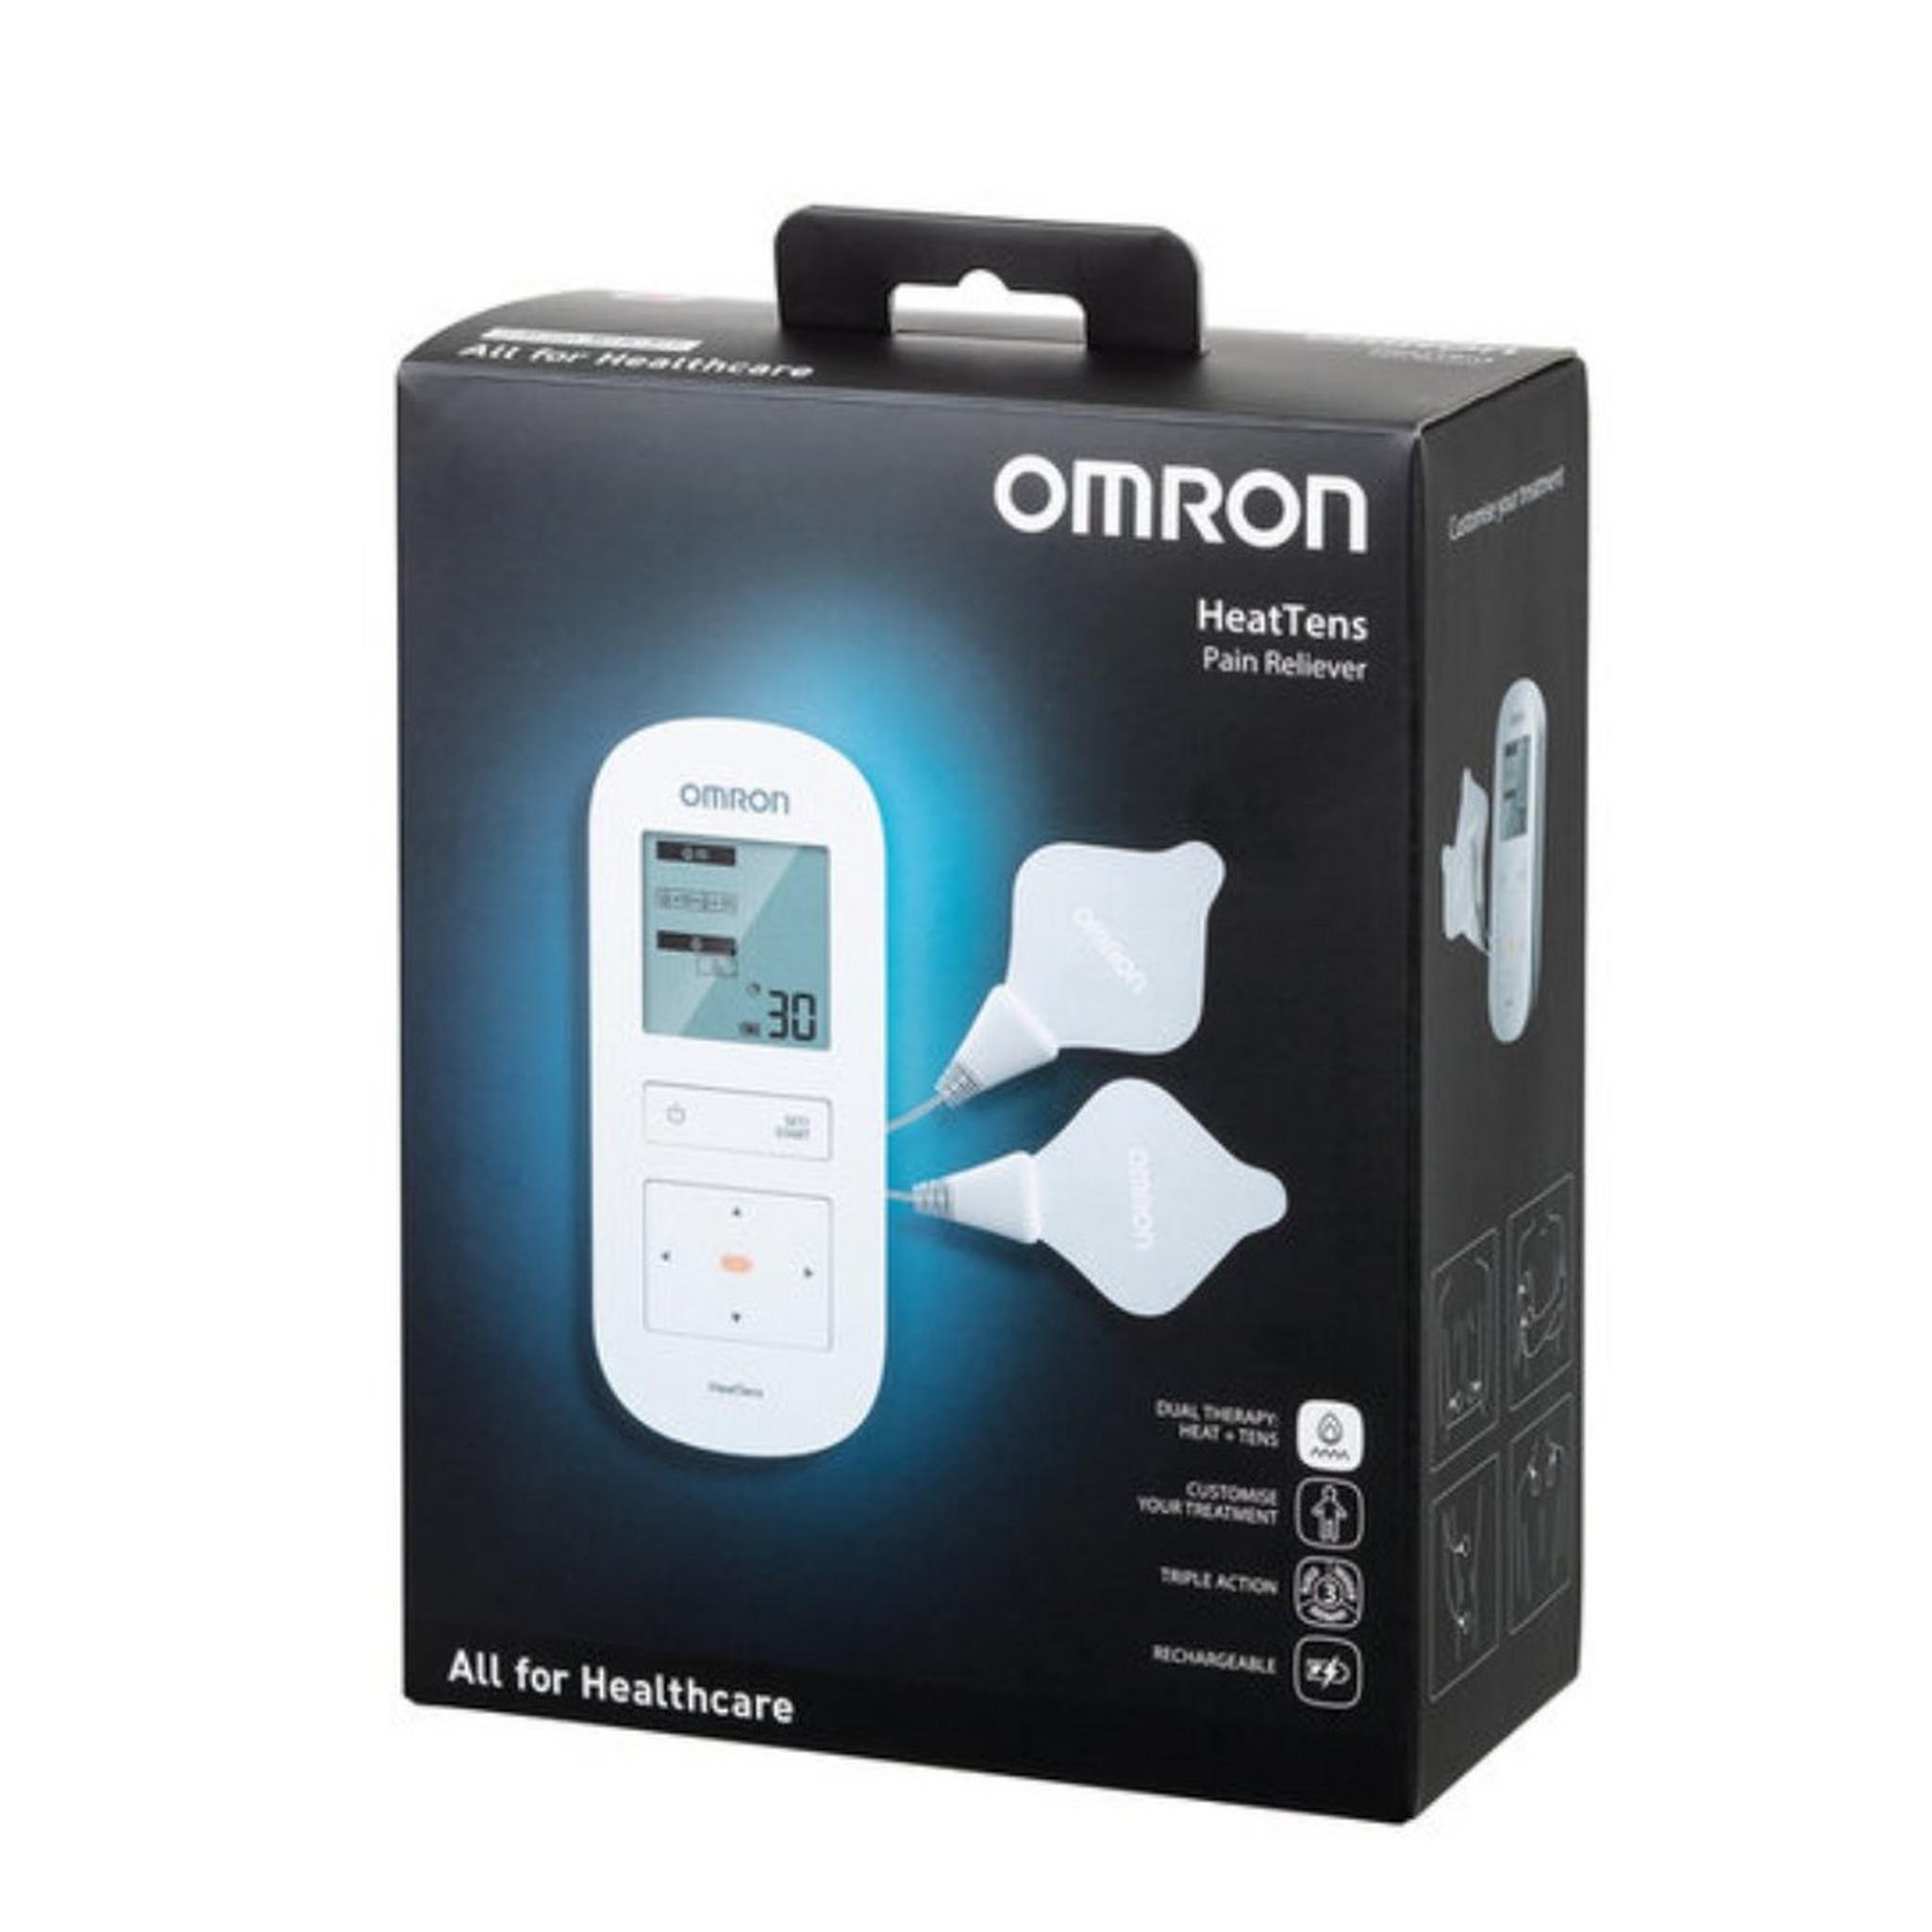 Omron HeatTens Pain Reliever (HV-F311-UK)